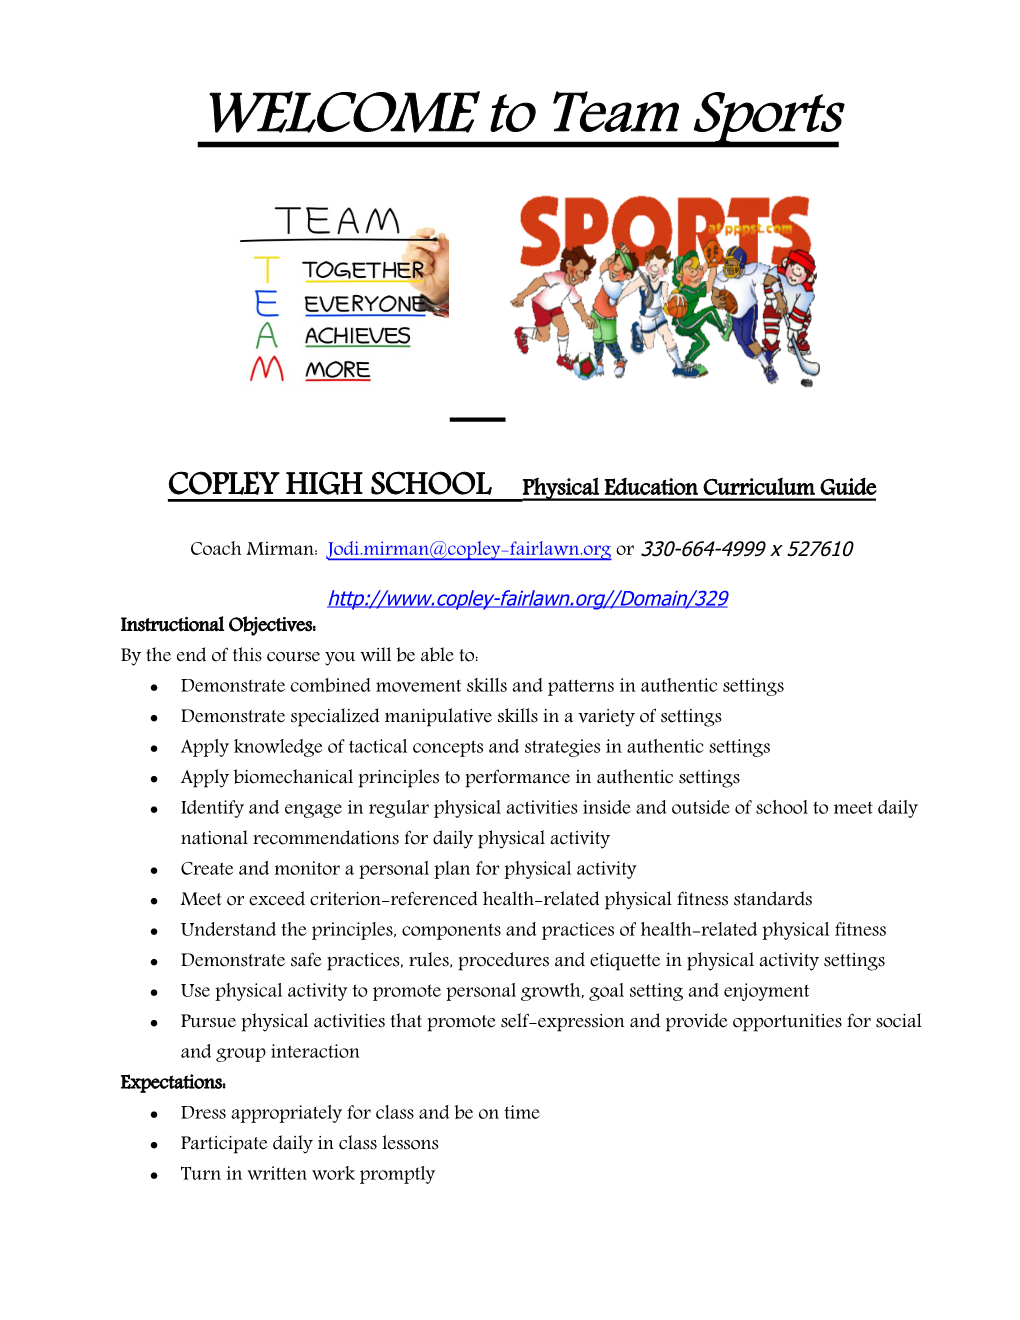 COPLEY HIGH SCHOOL Physical Education Curriculum Guide